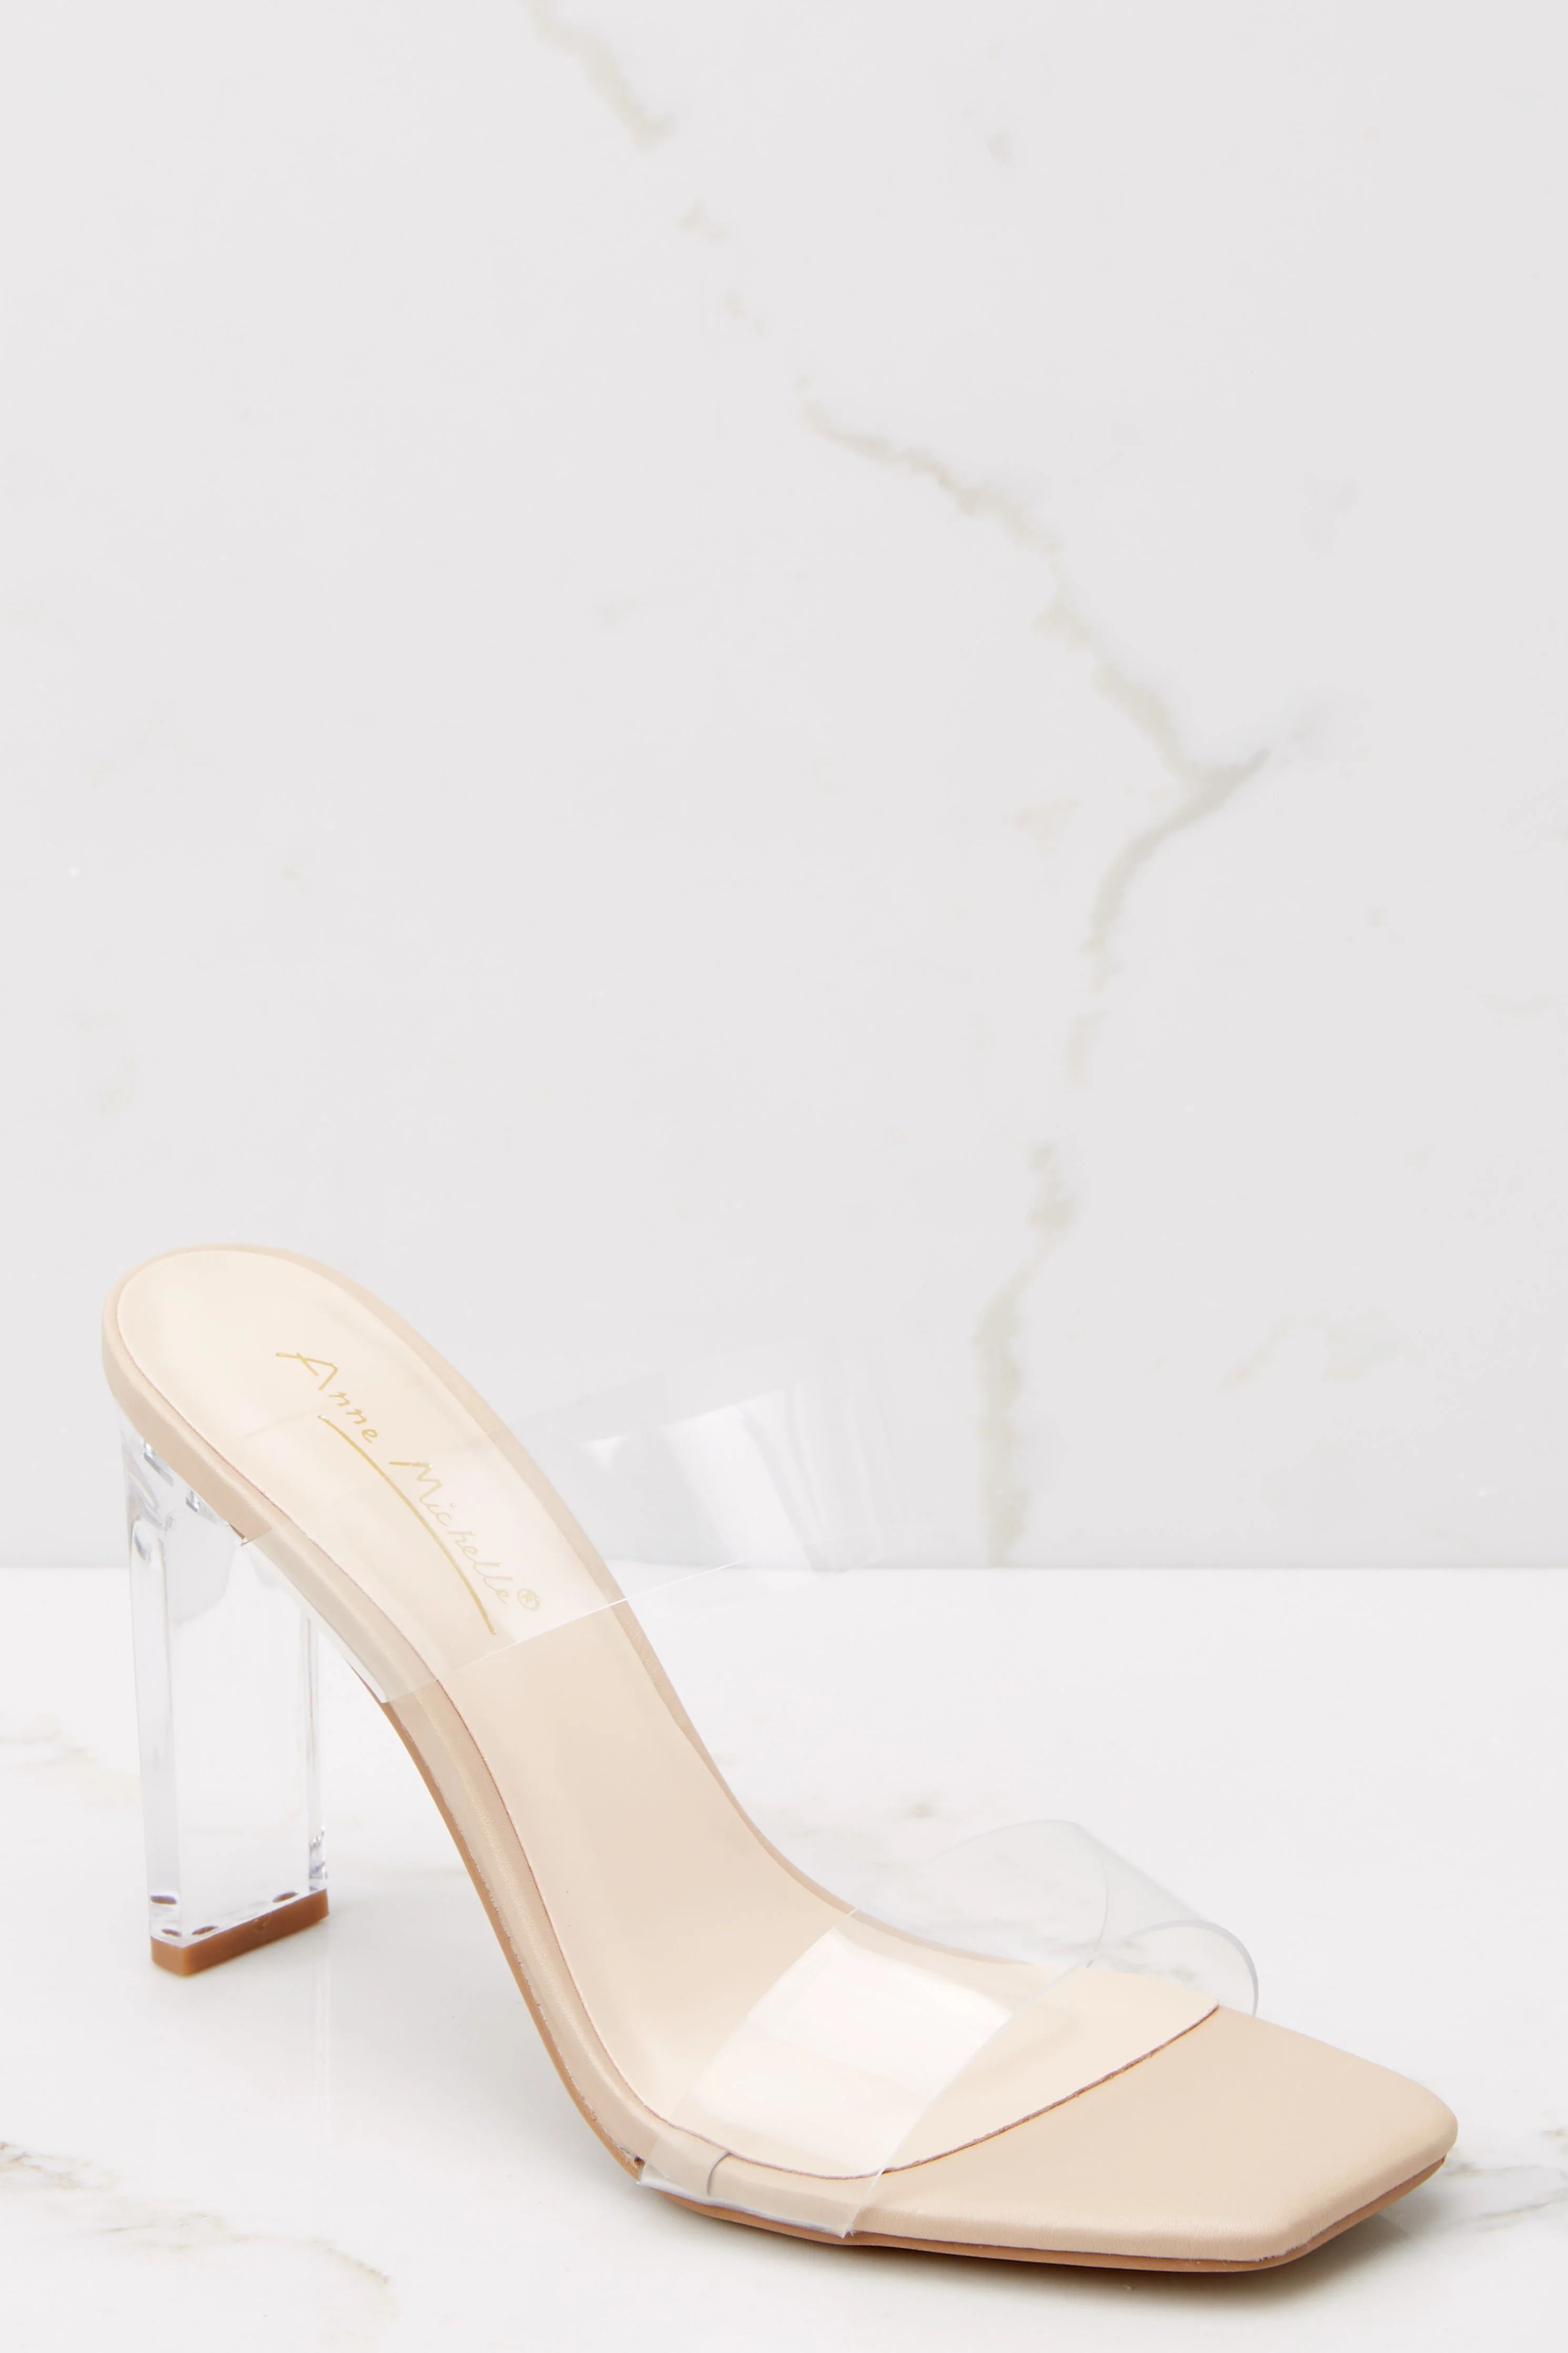 Really Love These Nude And Clear Heels | Red Dress 